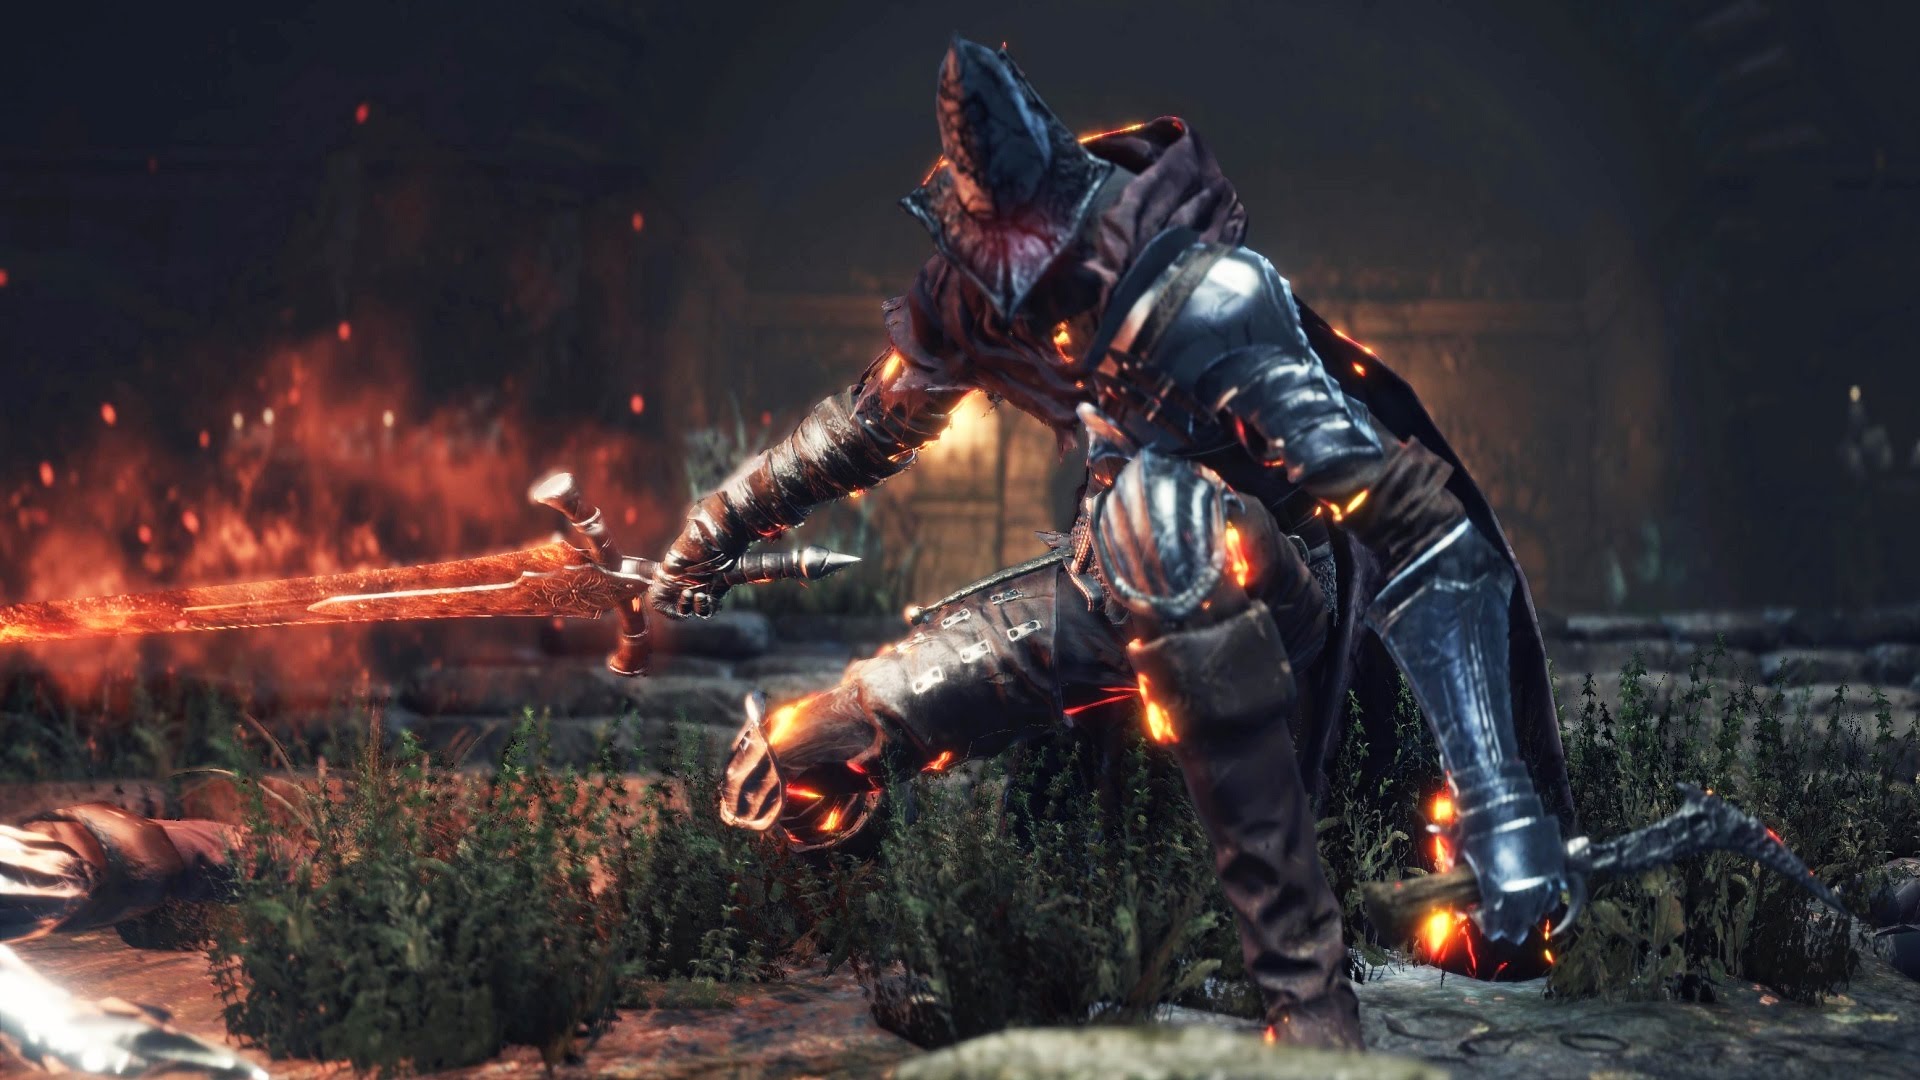 Dark Souls 3 Streamer Fights Bosses With The Power Of Dance